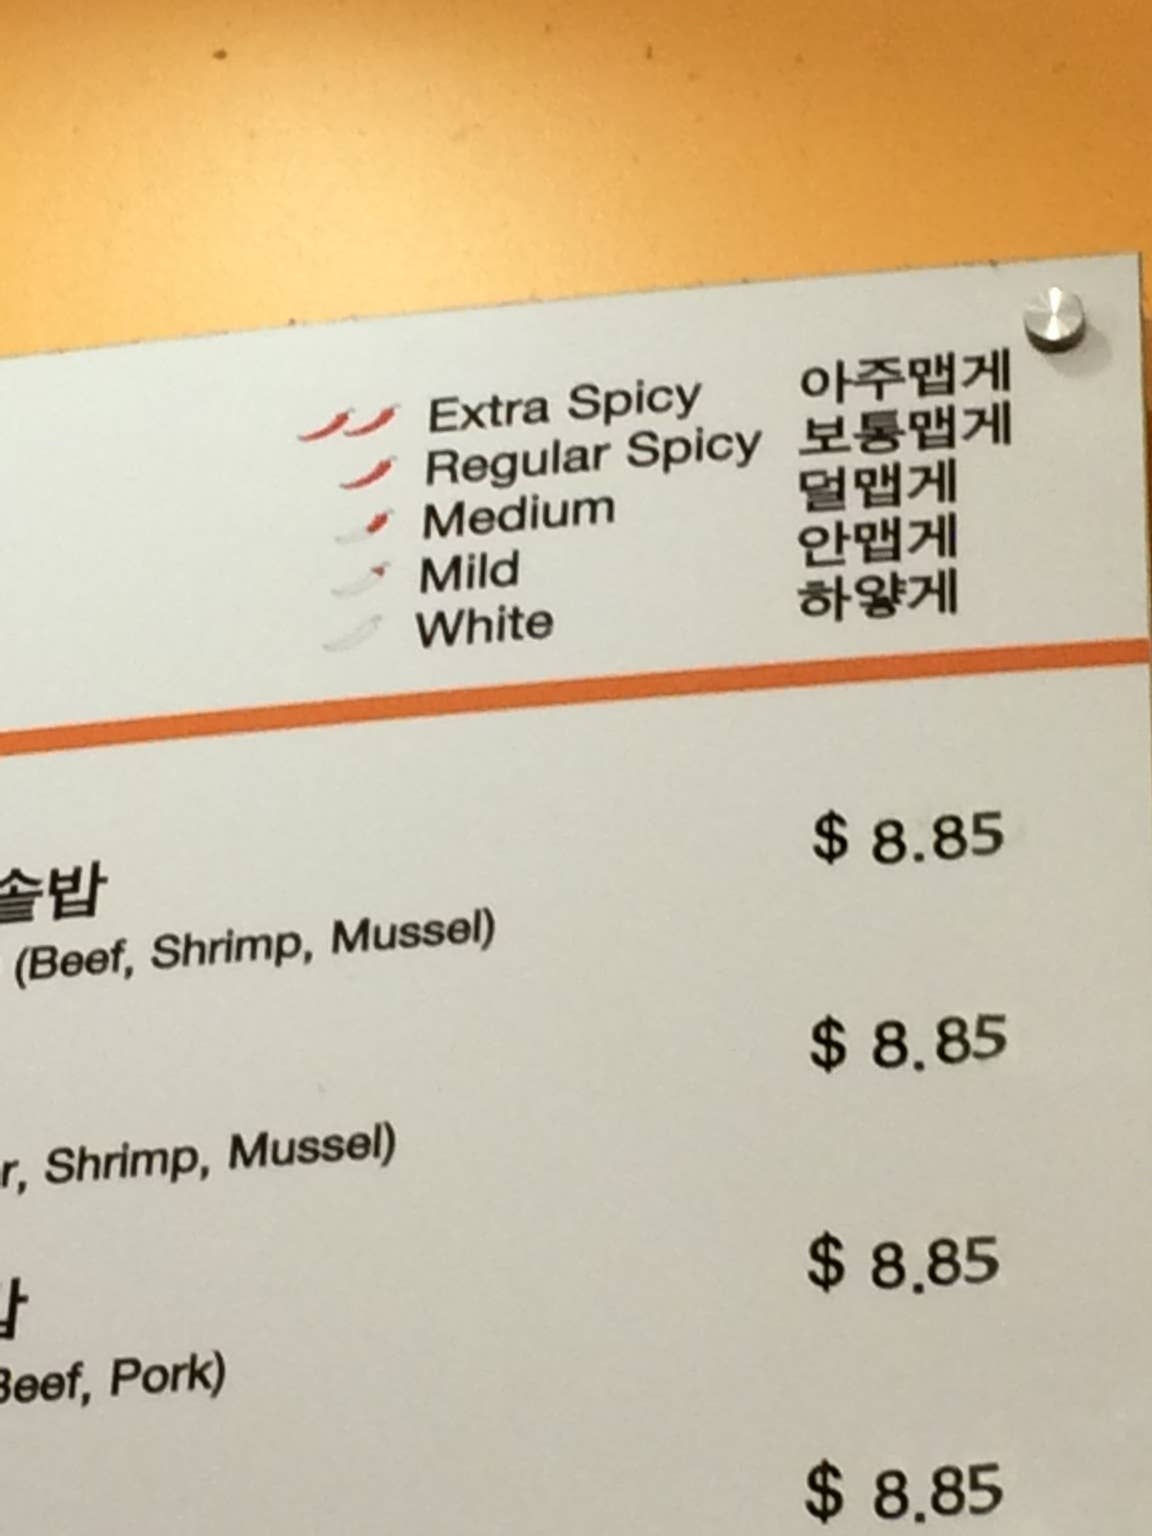 This Toronto Restaurant's Menu Has Gone Viral for Being Allegedly Racist